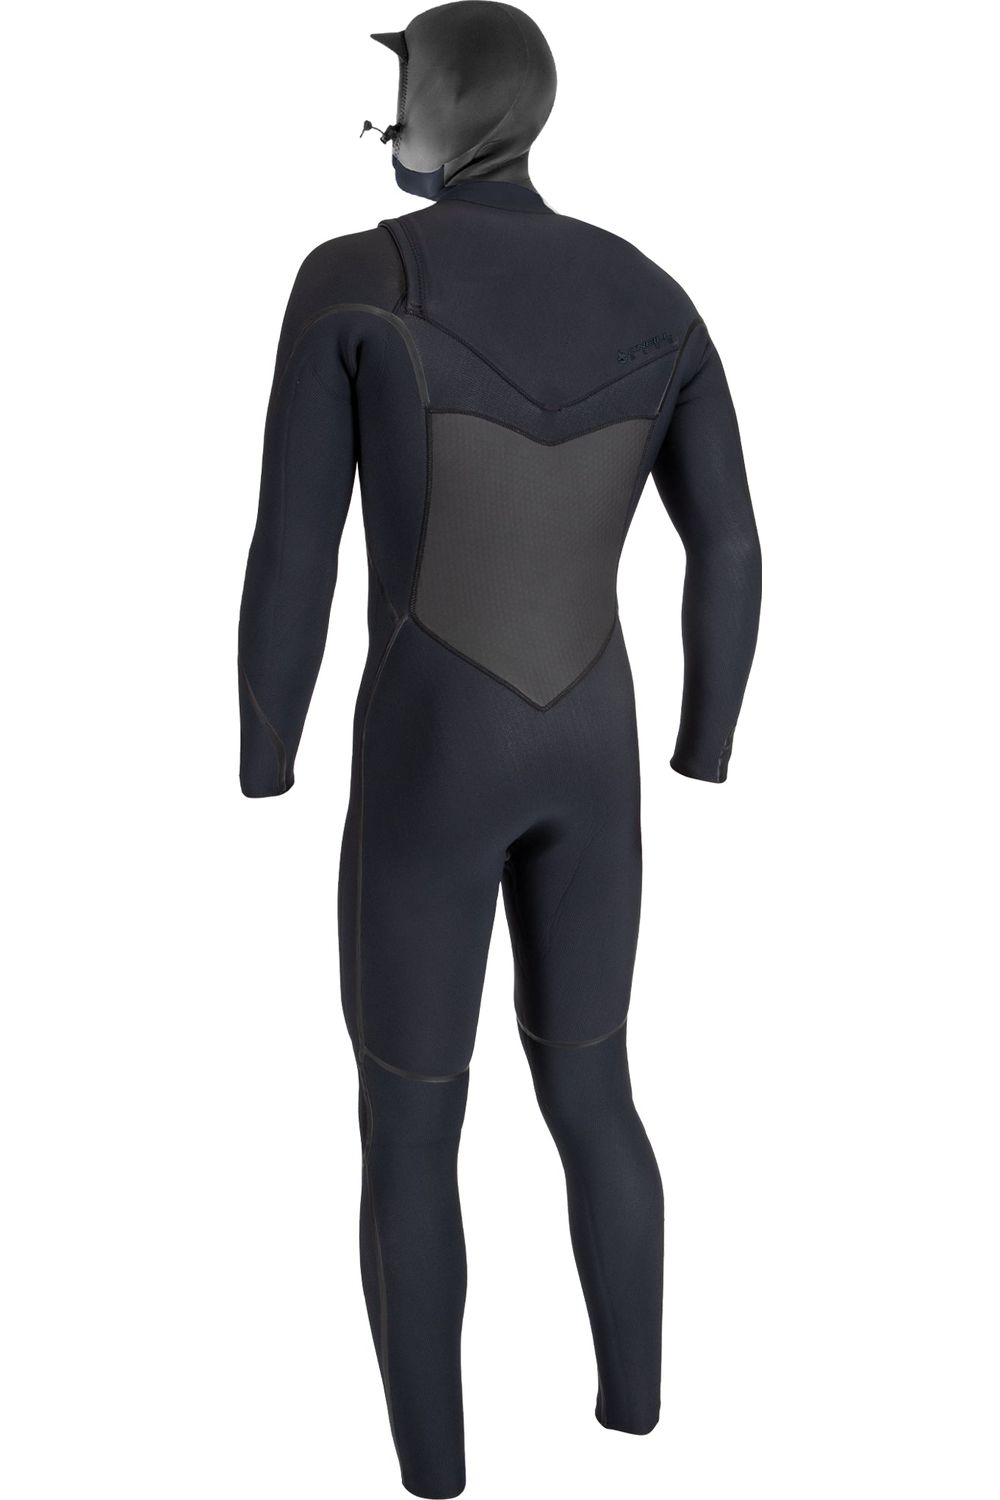 O'Neill Psycho Tech Wetsuit 6/4+ Chest Zip Hooded Black